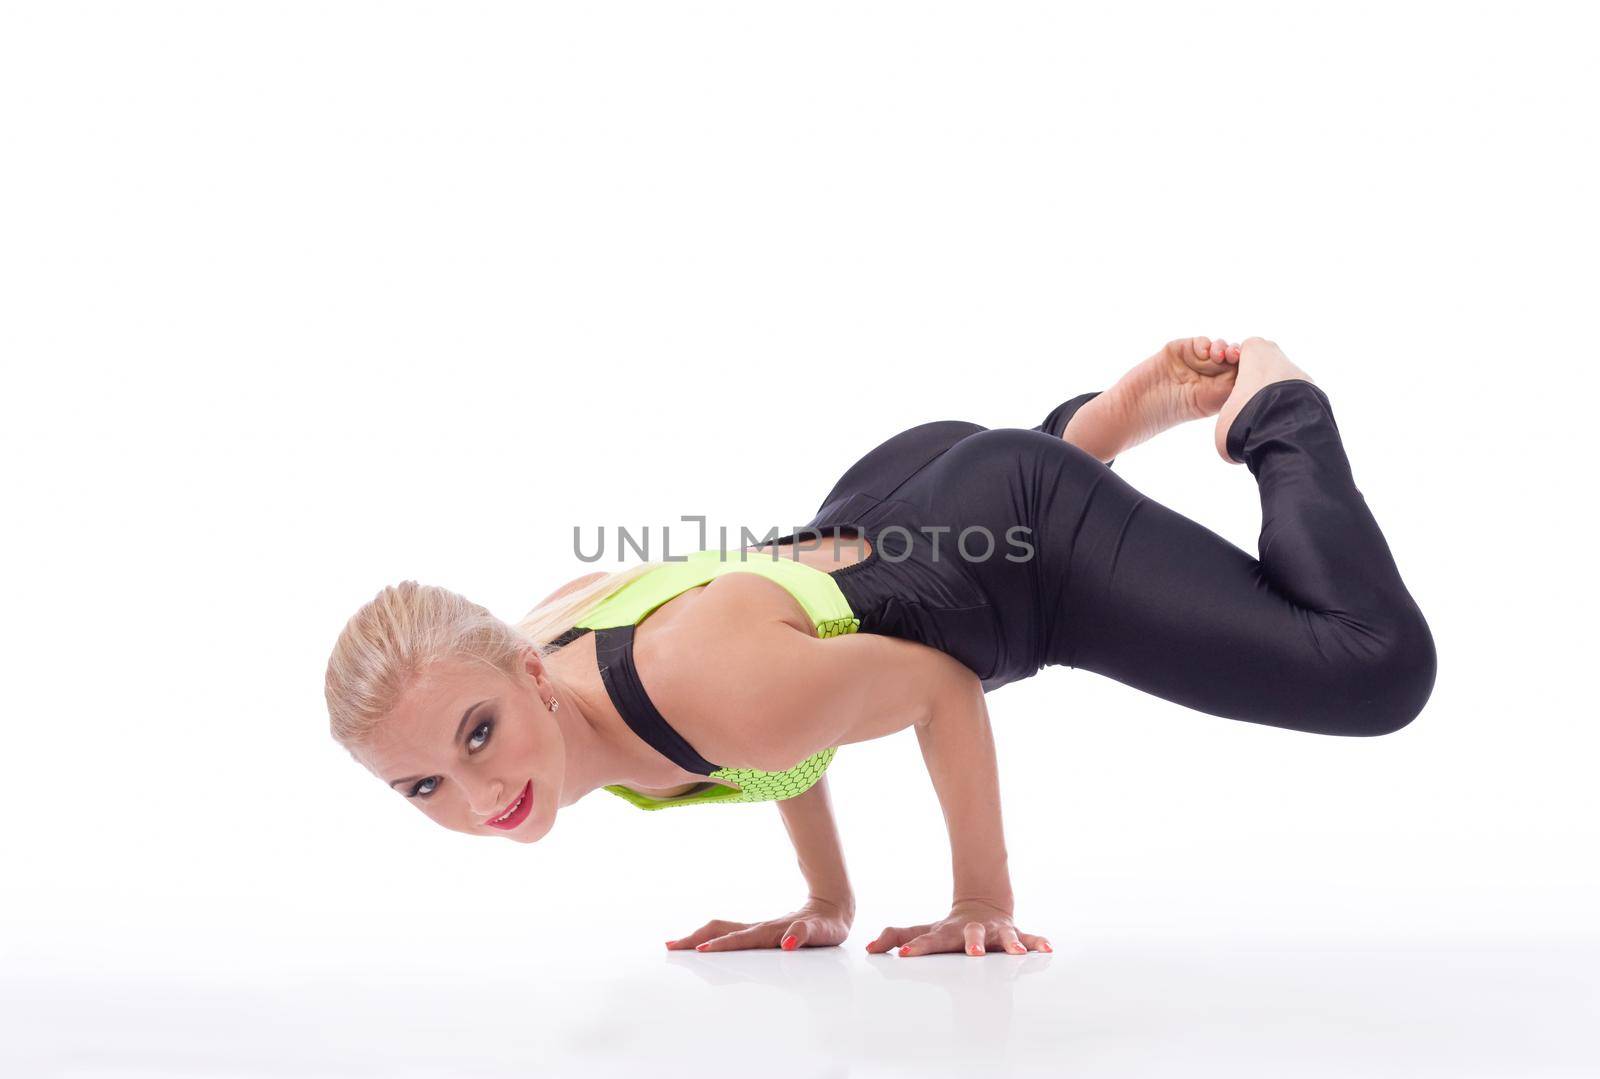 Look easy, huh? Portrait of a beautiful female gymnast doing a handstand balancing gracefully on her arms smiling to the camera isolated